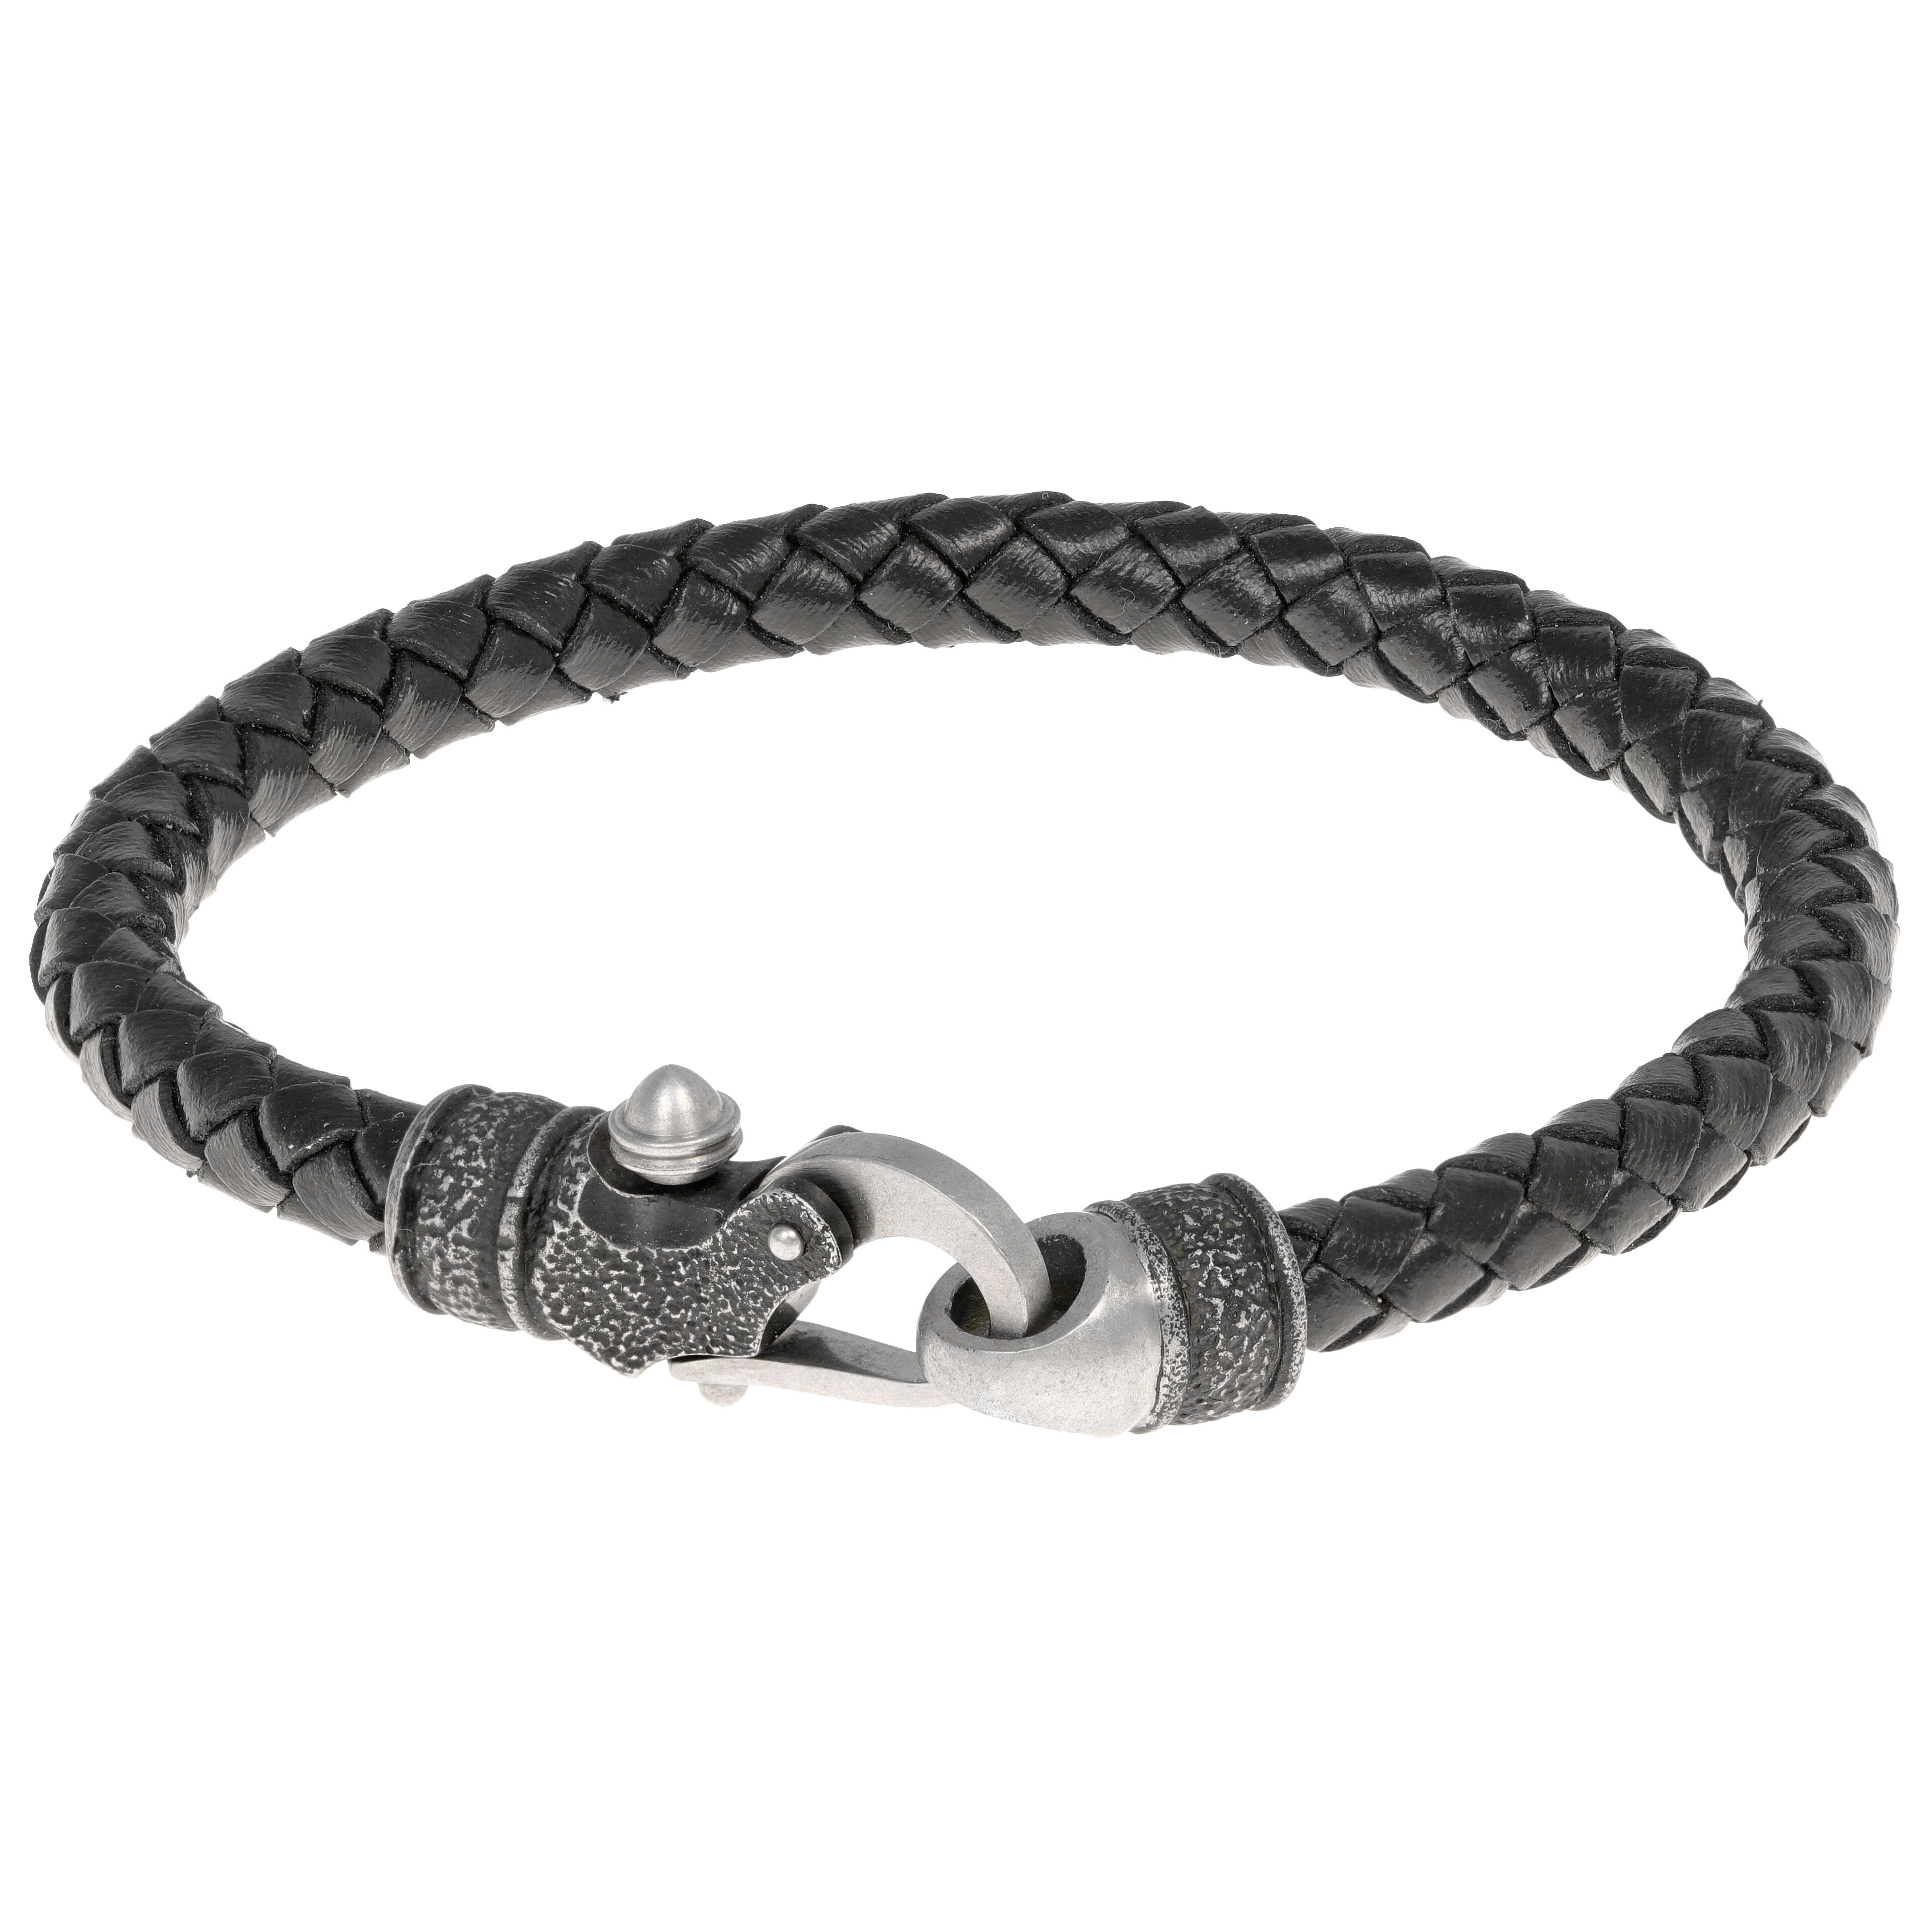 Buy JewelrieShop Braided Leather Bracelet for Mens Women Woven Wrap Bracelet  Magnetic Lock Clasp Genuine Leather Bracelet Wristband Vintage Cuff  Bracelet Leather Jewelry Friendship Couple Bracelet (Black) at Amazon.in